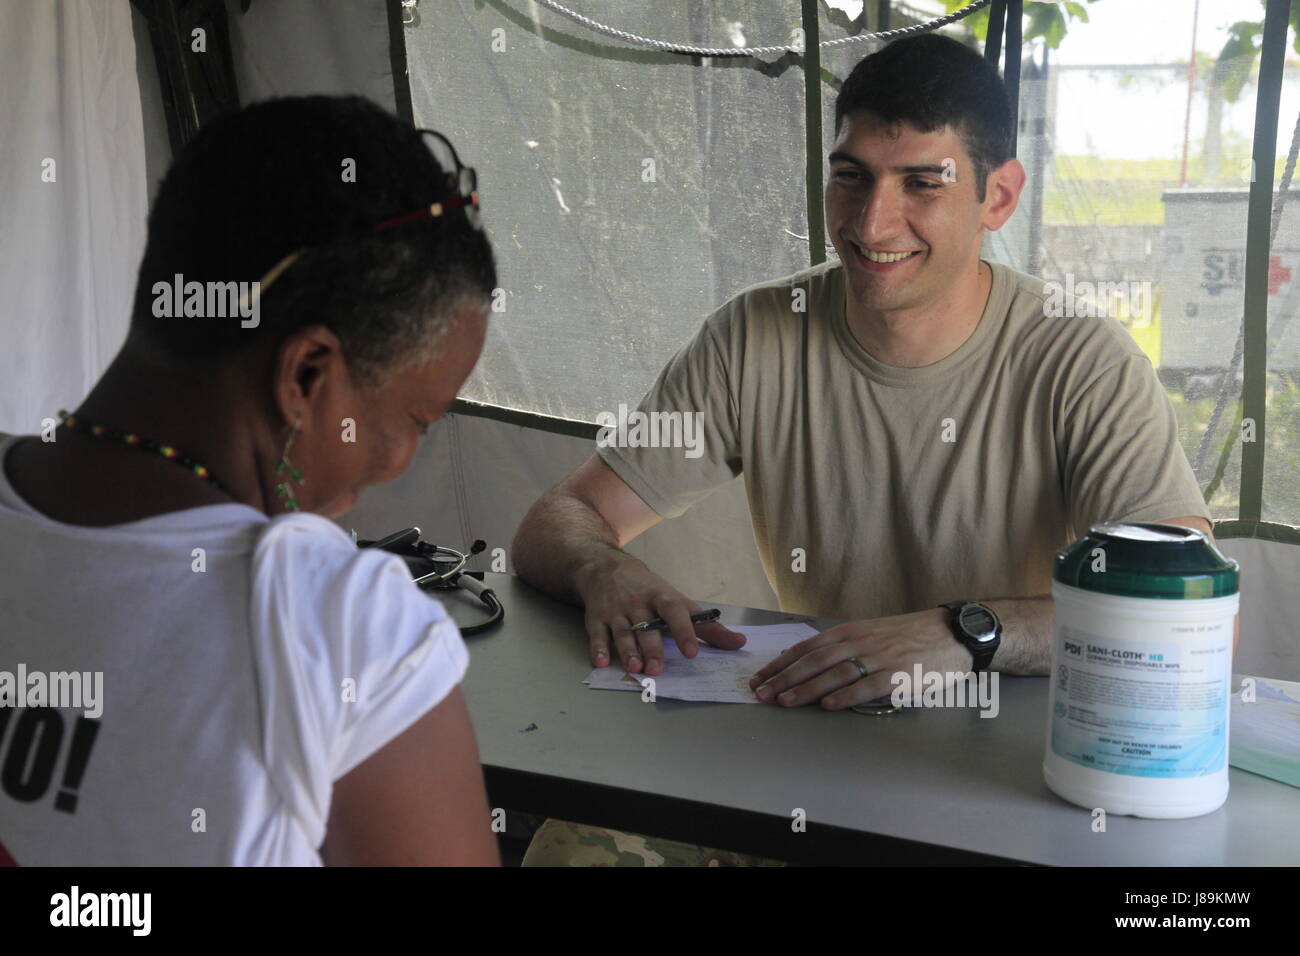 U.S. Army Captain Ilya Ryaboy, with the Brooke Army Medical Center from Fort Sam Houston, Texas, evaluates a patient's health at a medical readiness event in Dangriga, Belize, May 22, 2017. This is the third and final medical event scheduled for Beyond the Horizon 2017, a U.S. Southern Command-sponsored, Army South-led exercise designed to provide humanitarian and engineering services to communities in need, demonstrating U.S. support for Belize. (U.S. Army photo by Spc. Kelson Brooks) (RELEASED) Stock Photo